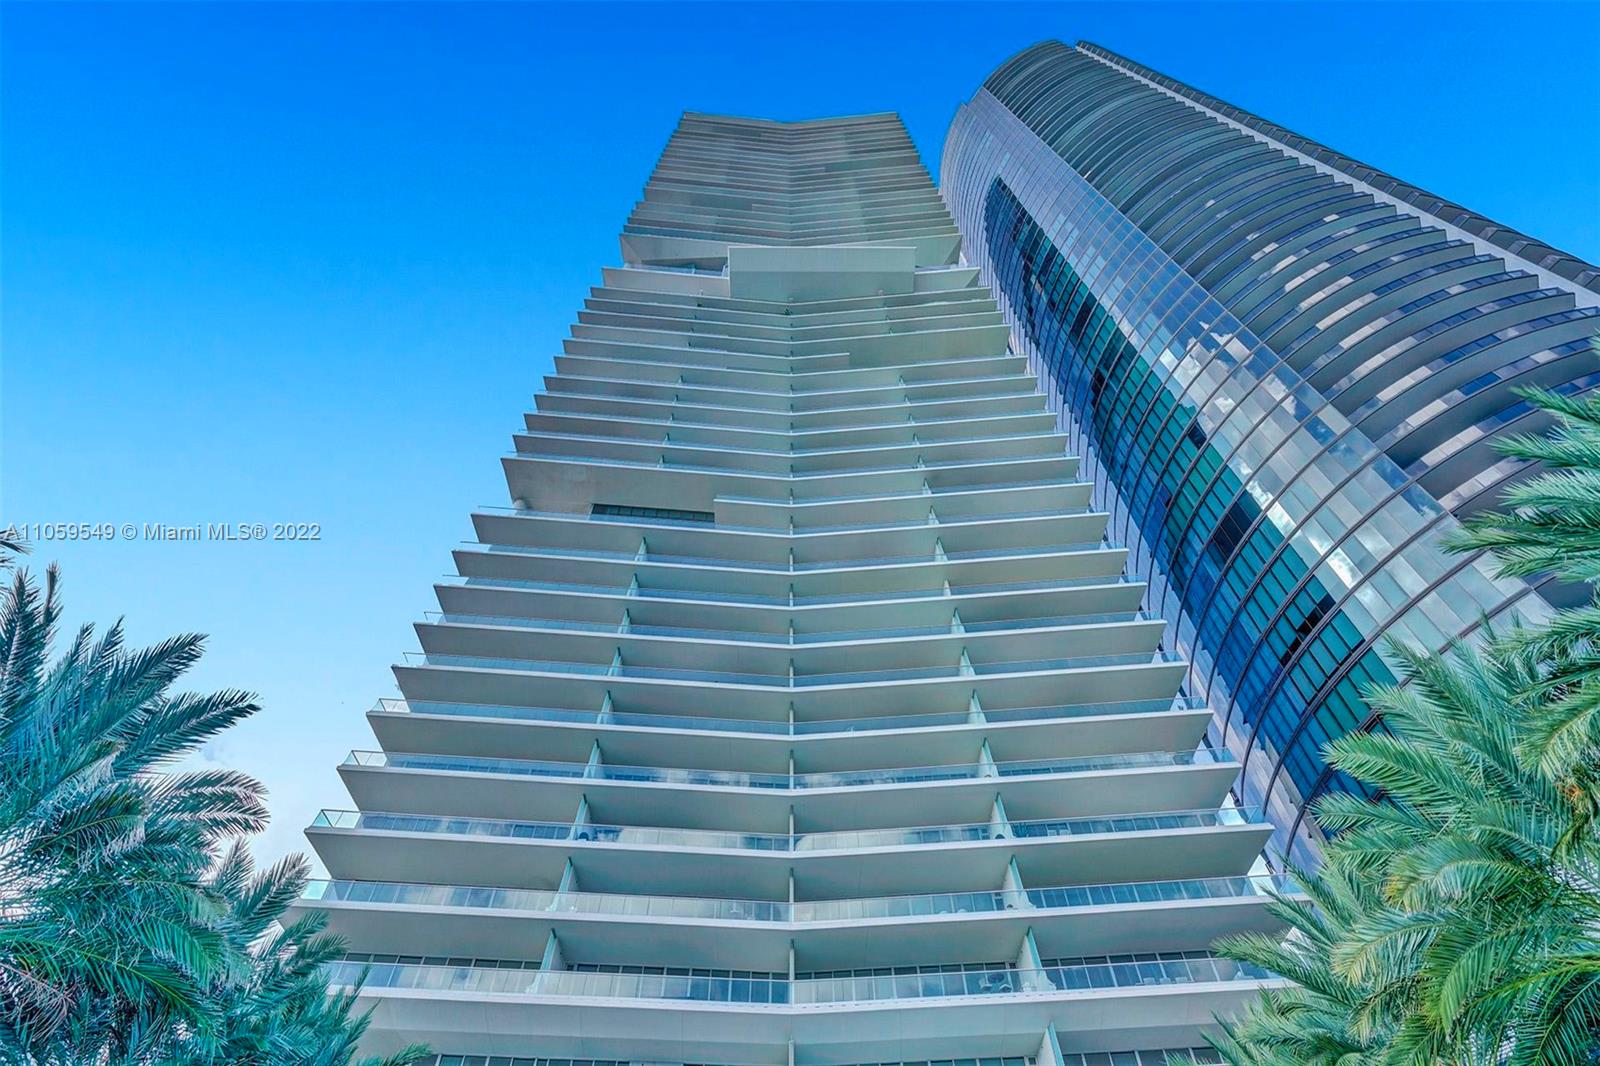 18501 Collins Ave 1902, Sunny Isles Beach, Florida 33160, 3 Bedrooms Bedrooms, ,4 BathroomsBathrooms,Residential,For Sale,18501 Collins Ave 1902,A11059549